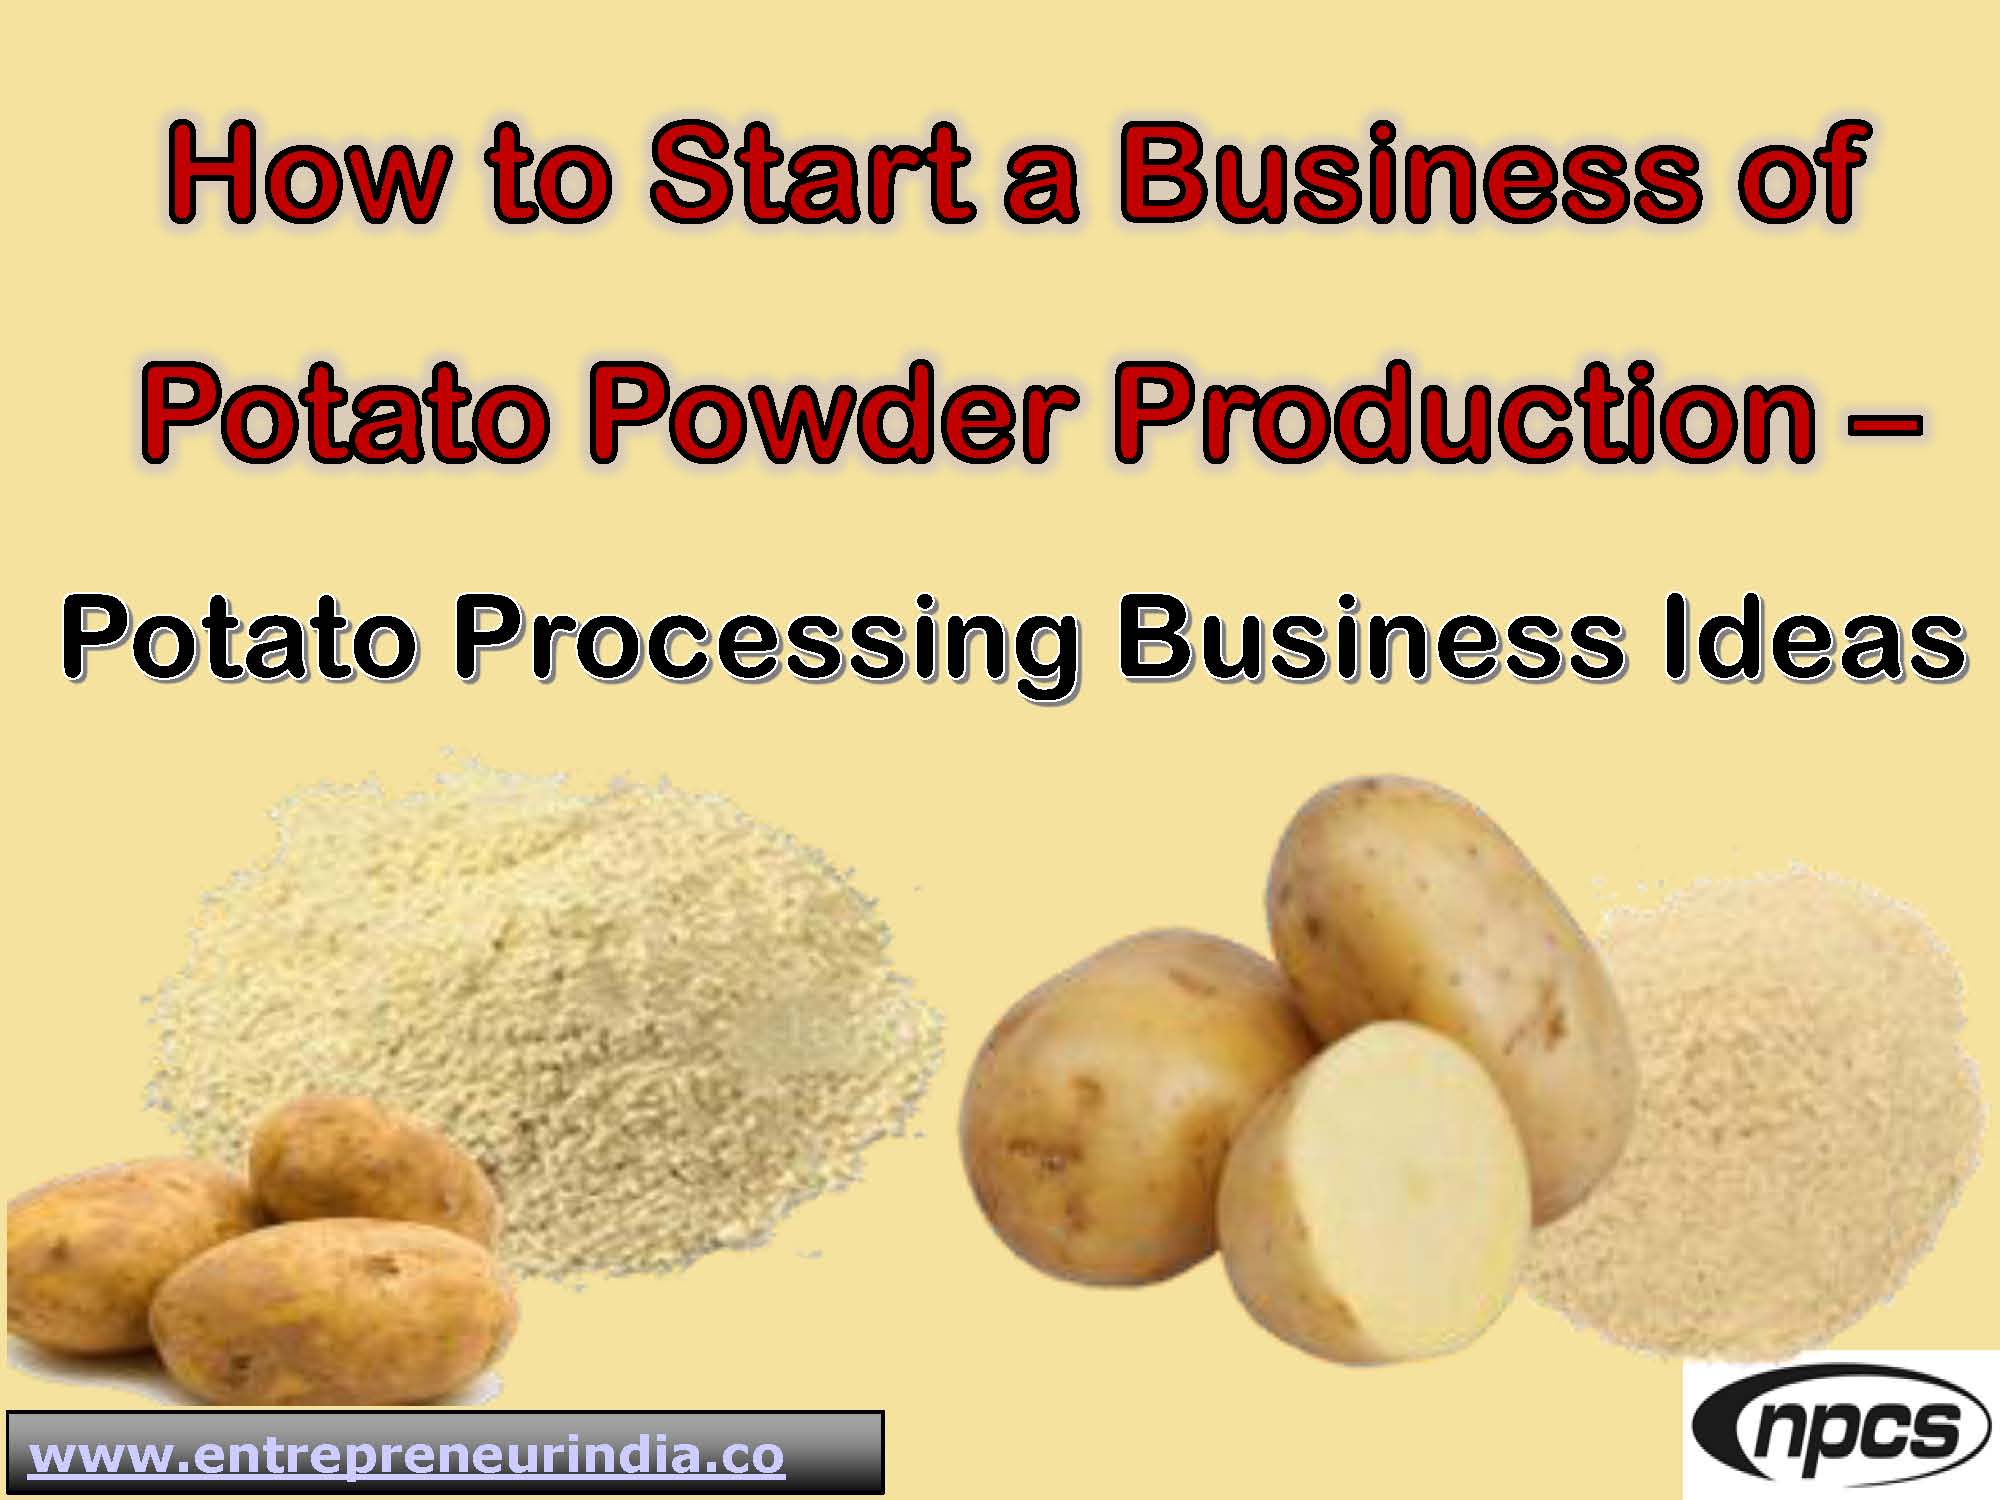 How to Start a Business of Potato Powder Production.jpg